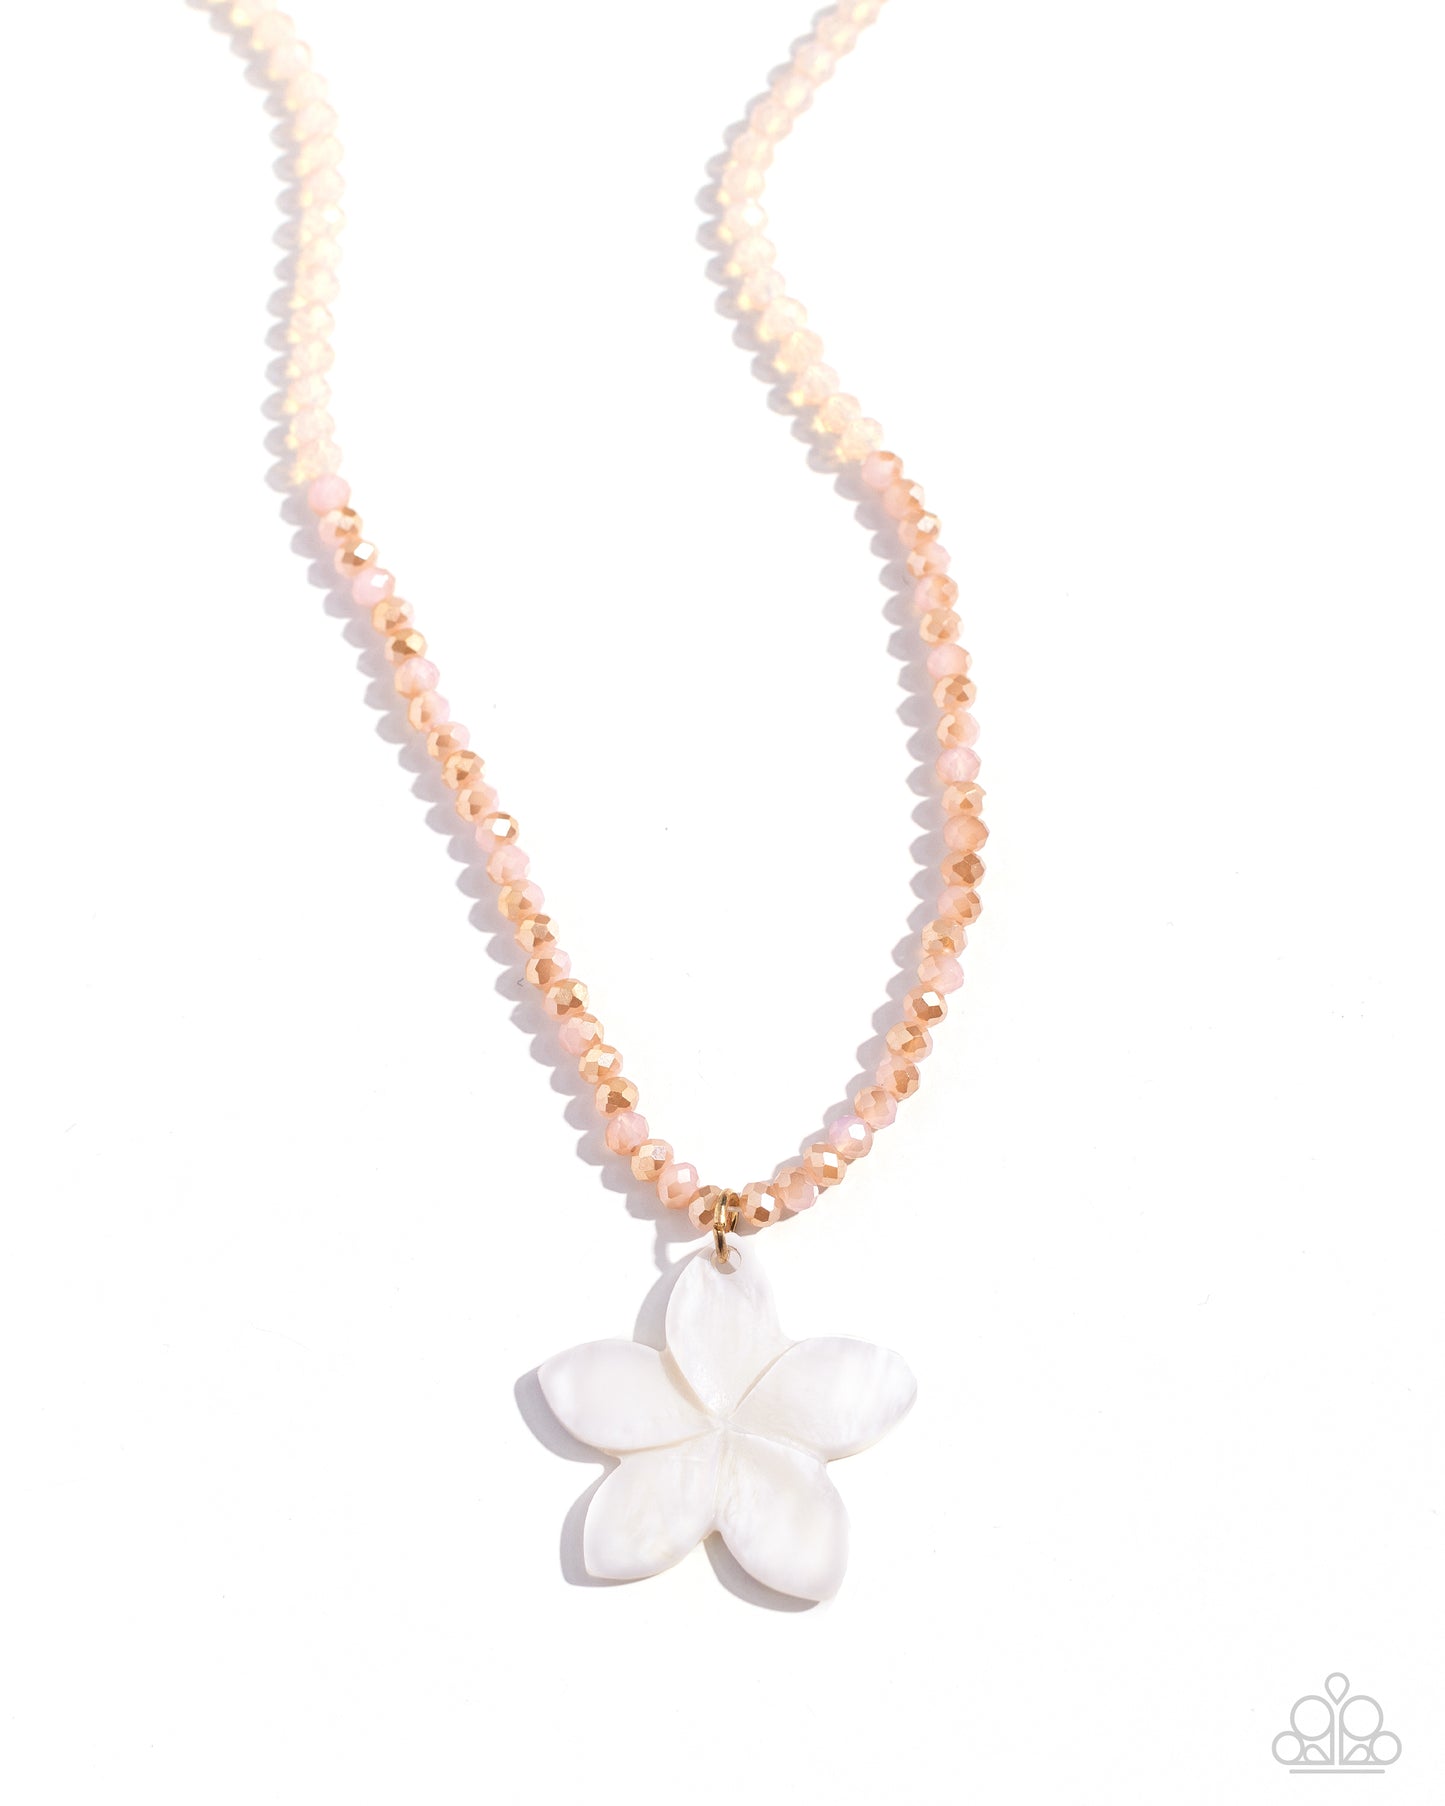 Handcrafted Hawaiian - Pink Shimmery Beads/White Shell Flower Paparazzi Necklace & matching earrings